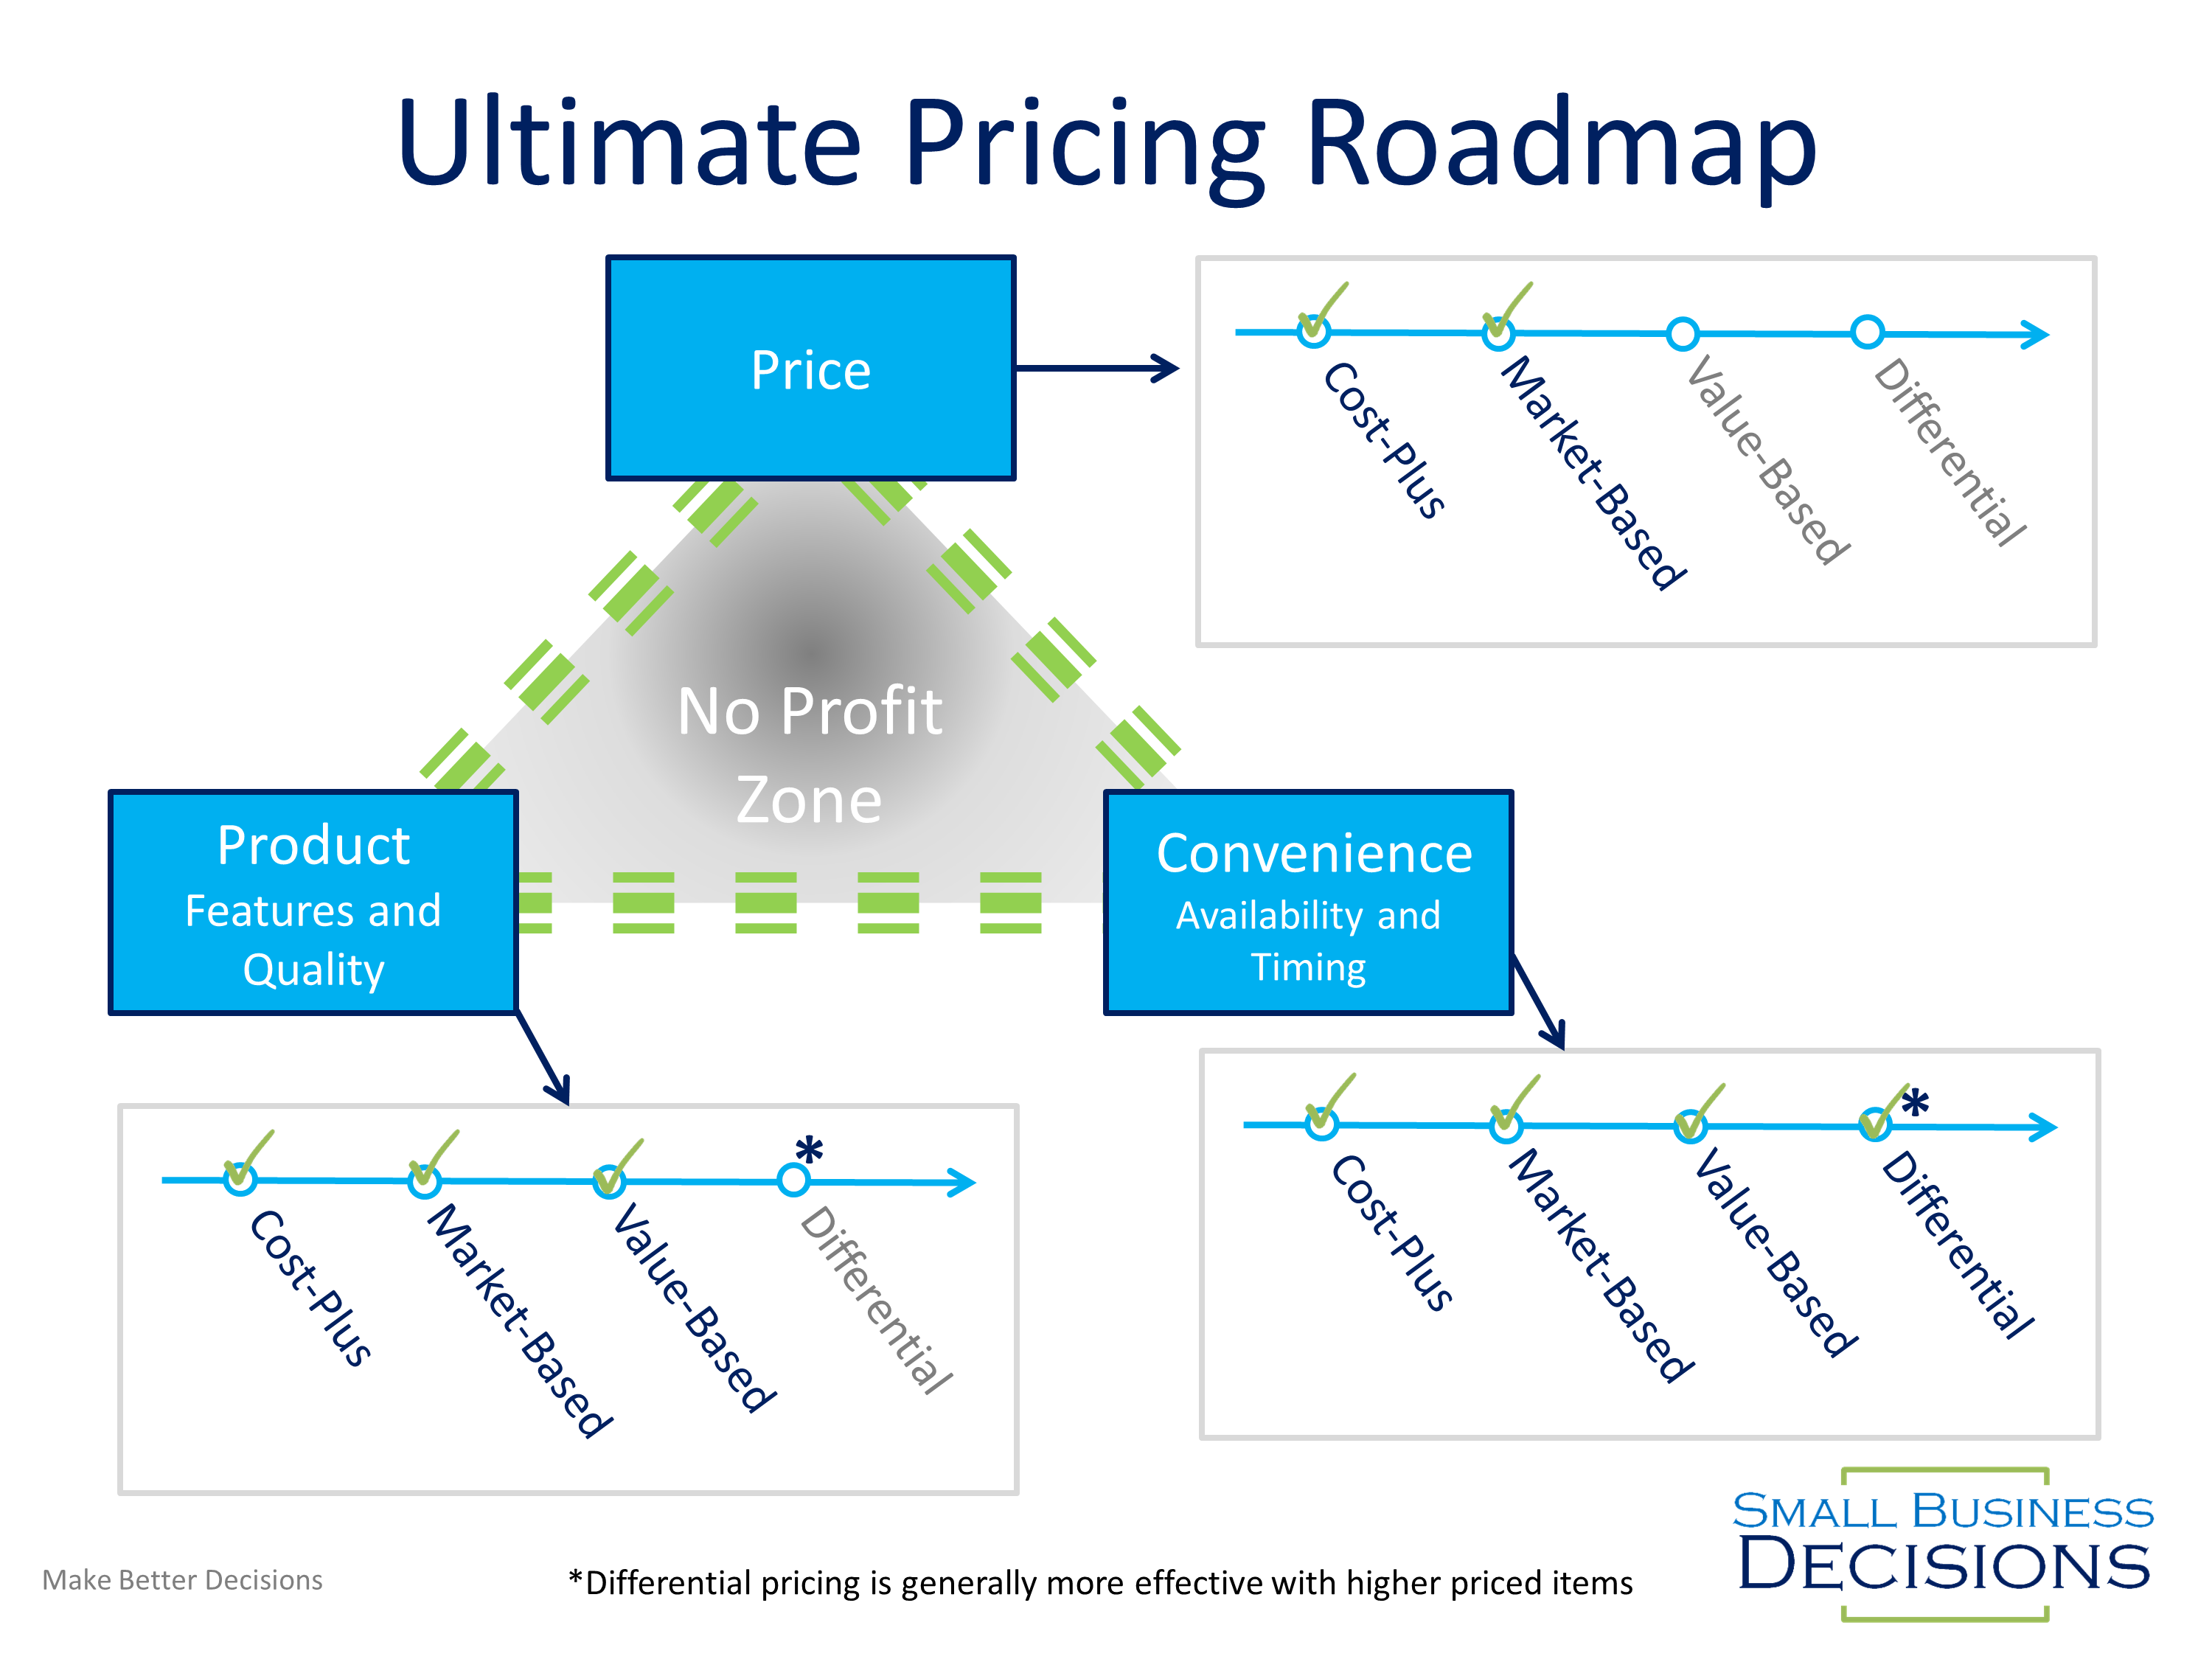 Pricing method. The Ultimate Price. Quality of service схема. Pricing Strategy for the Arts. Price Roadmap.